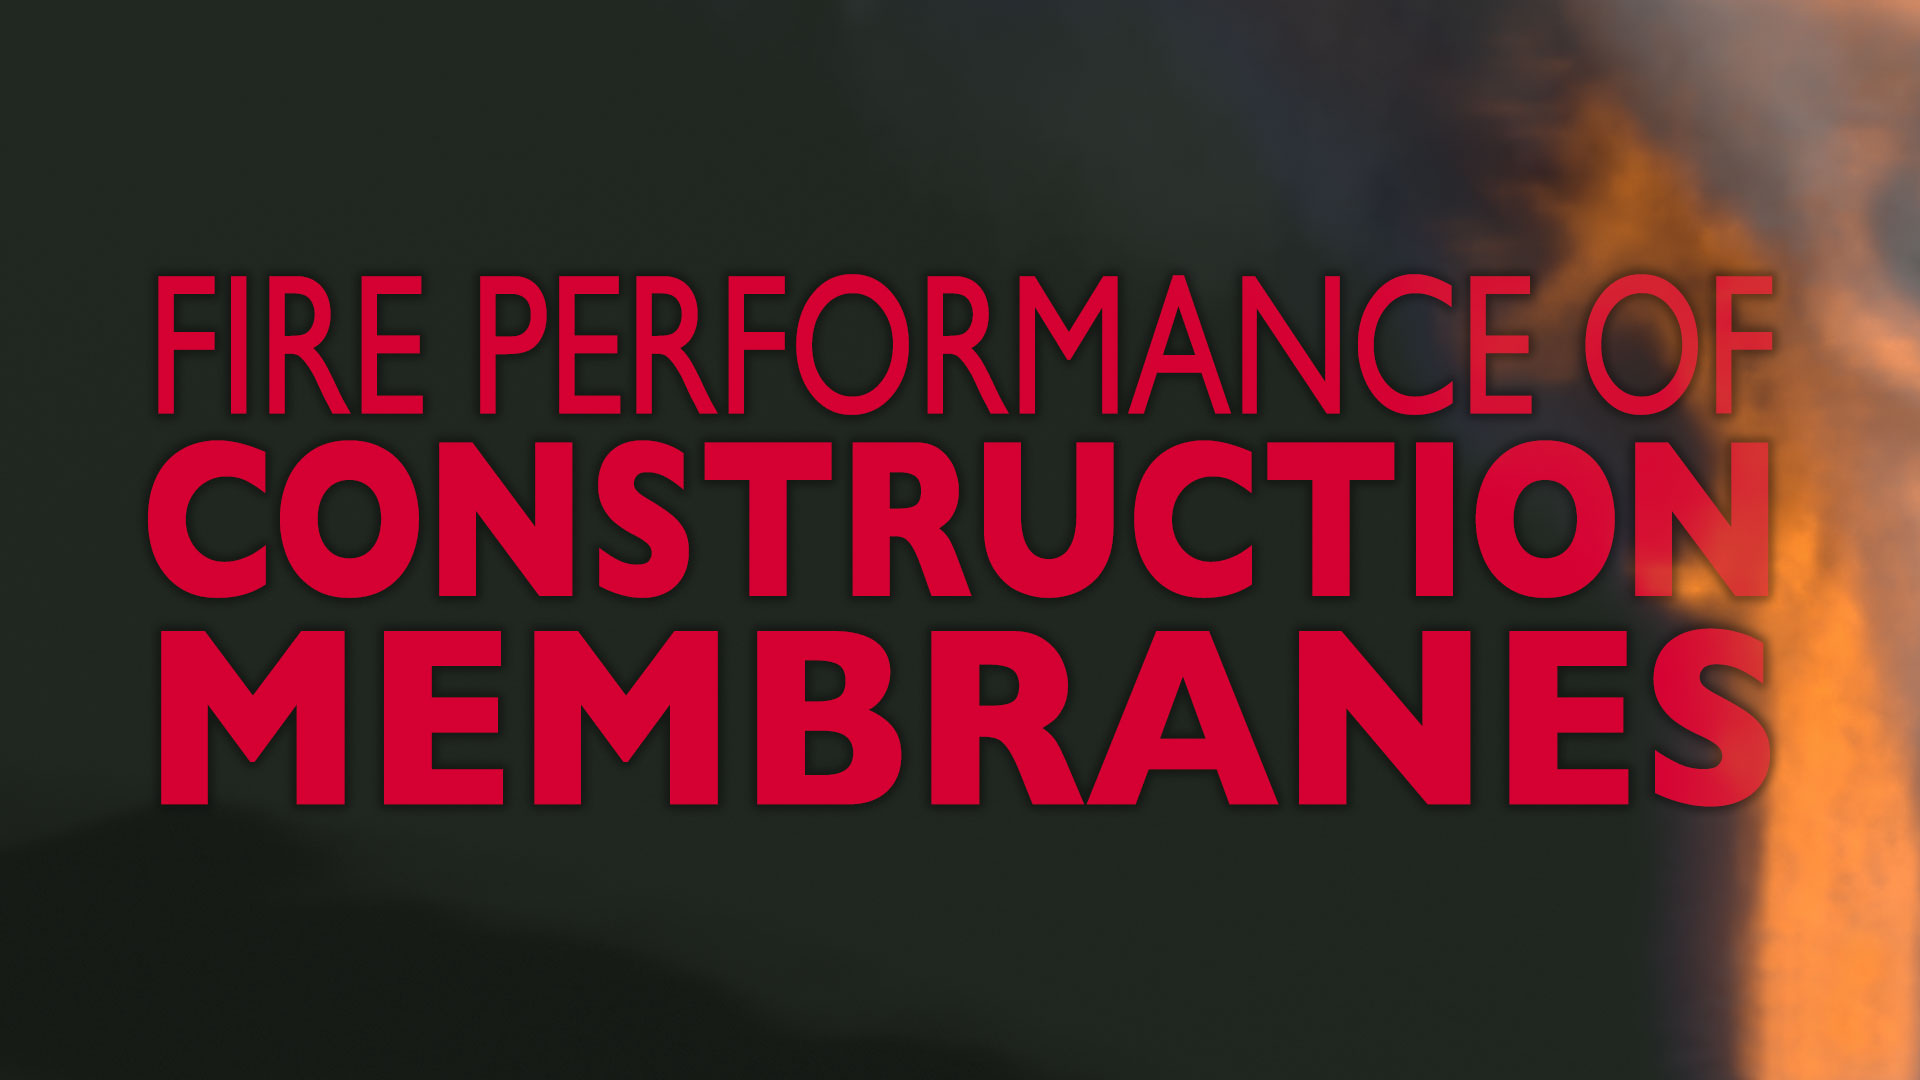 Welcome to our 30-minute webinar, "Fire Performance of Construction Membranes". This webinar is followed by a Live Zoom Q&A session hosted by our Managing Director Keira Proctor, alongside our team of technical experts.